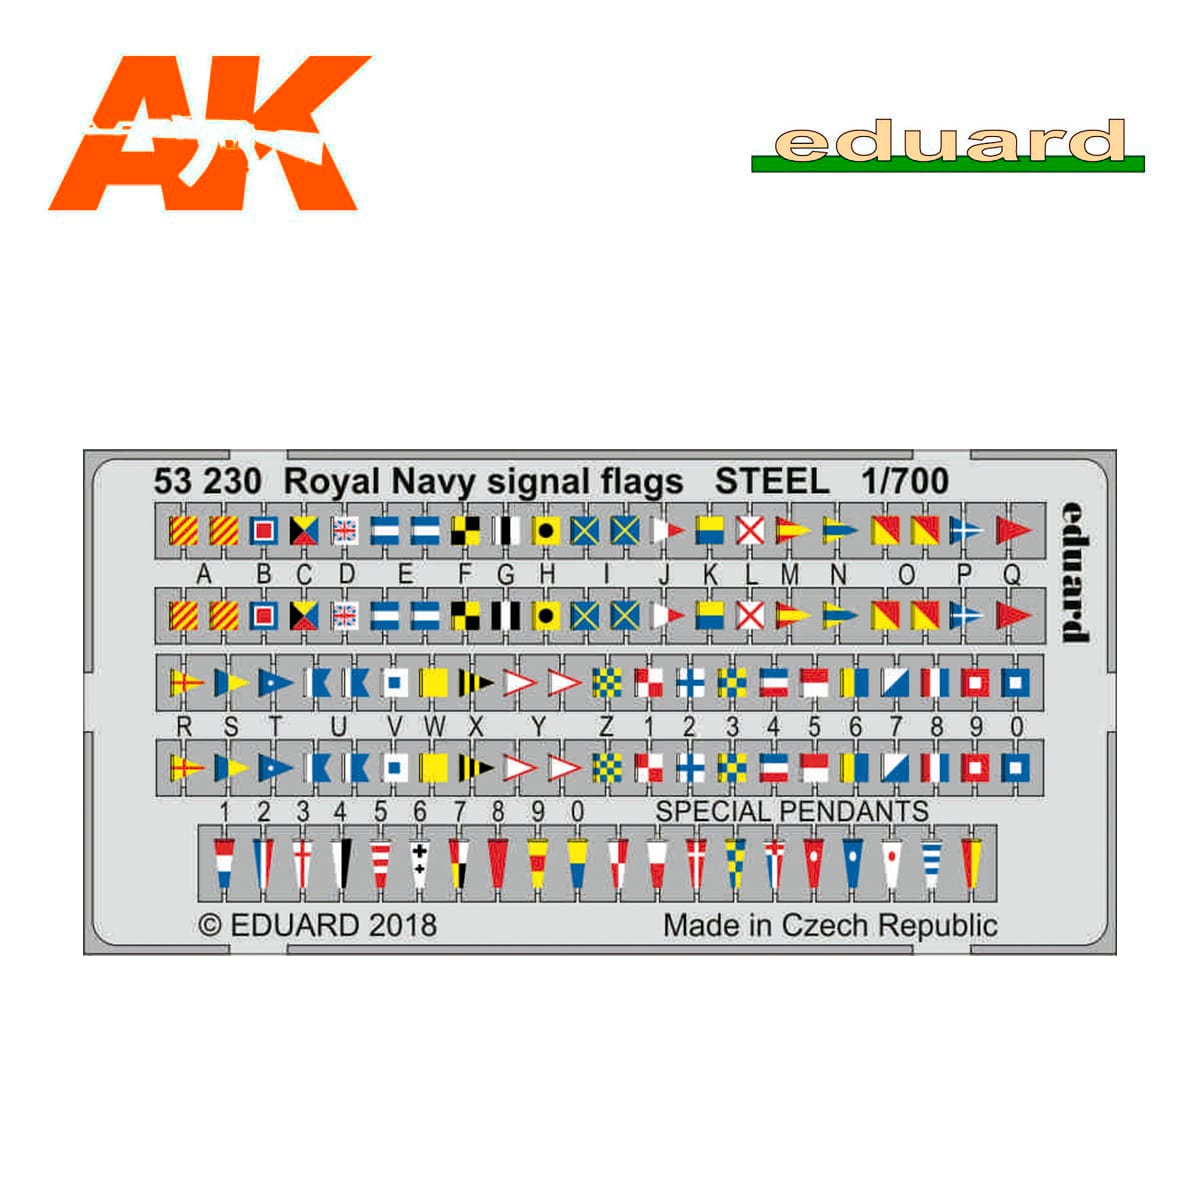 Royal Navy signal flags STEEL  1/700